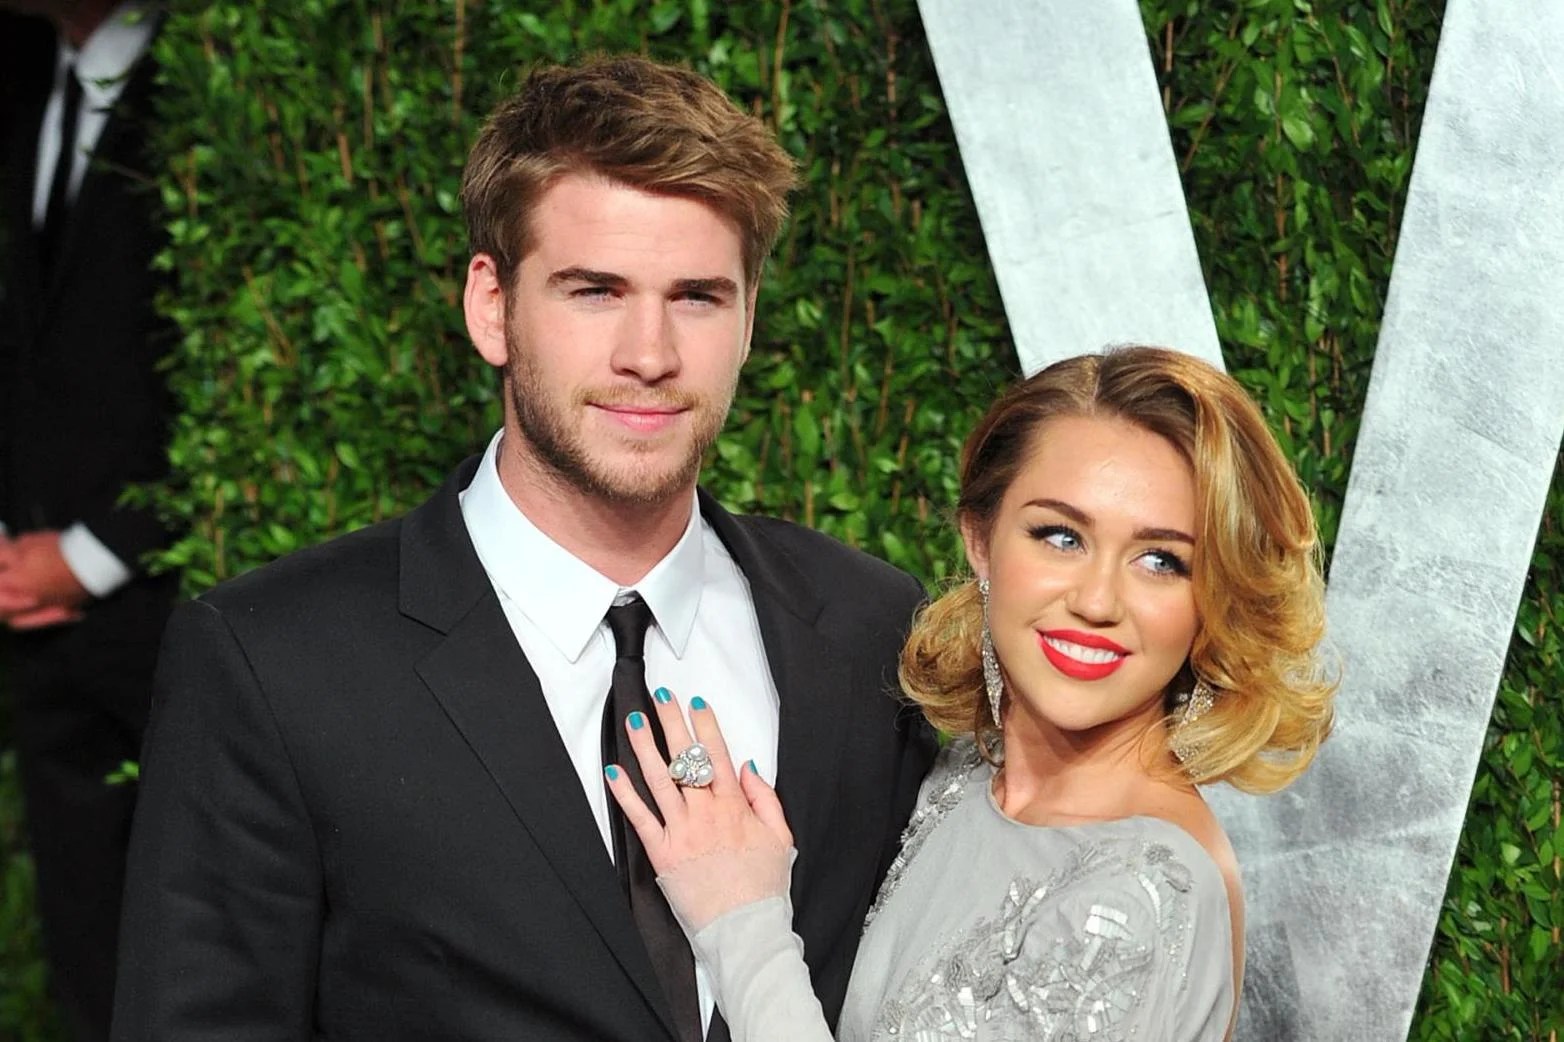 Are Miley Cyrus and Liam Hemsworth married? Pictures show the singer in